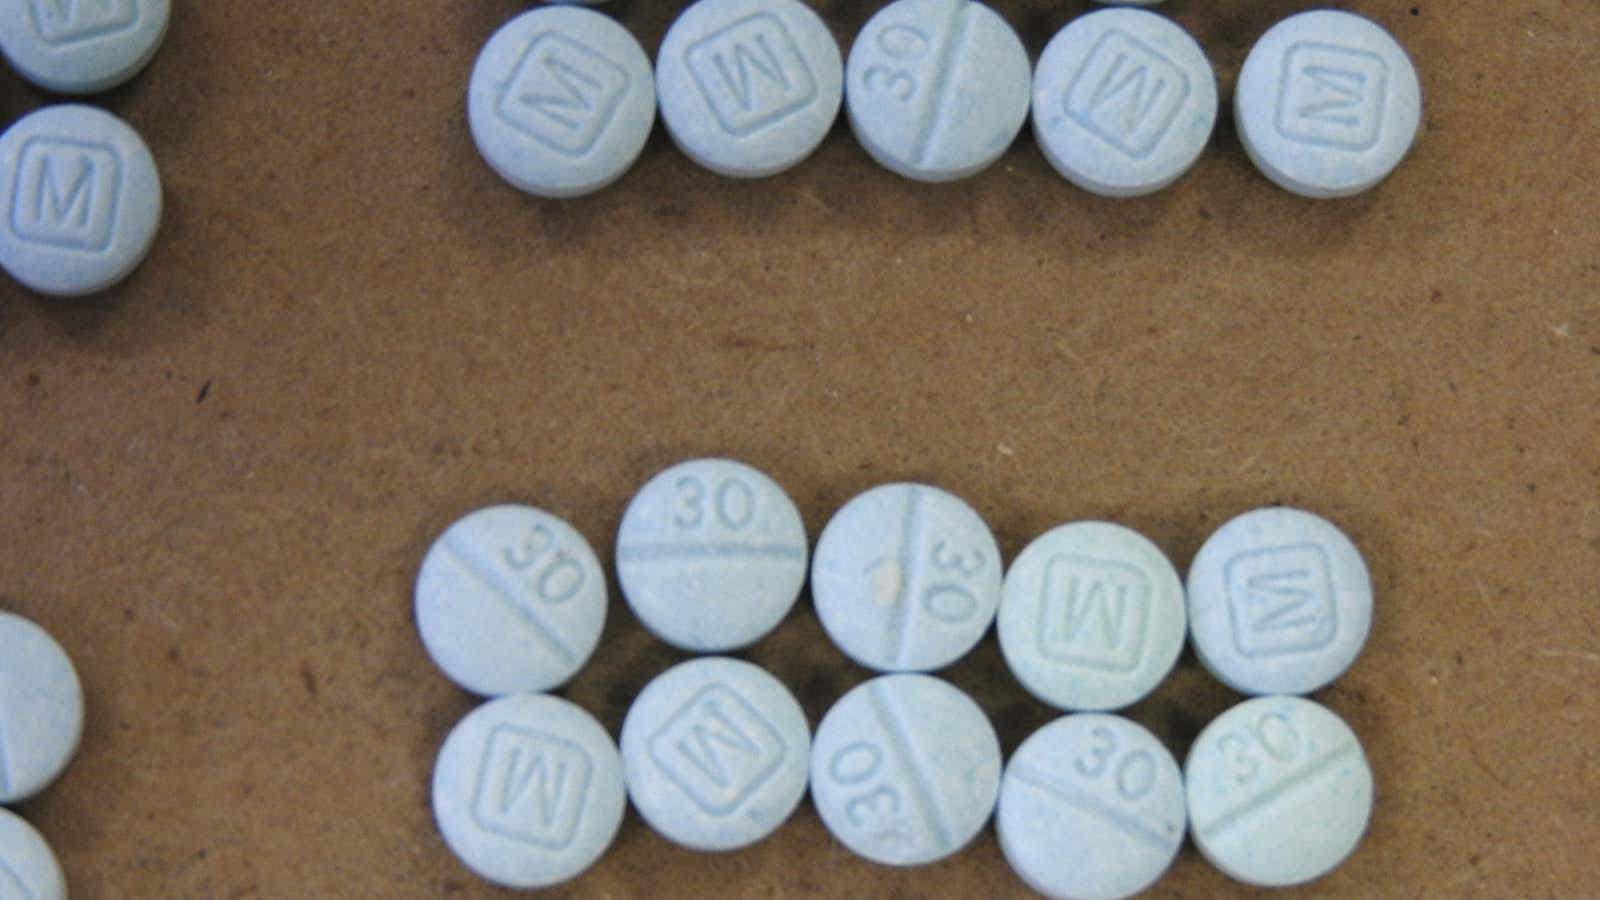 Fentanyl disguised in pill form.